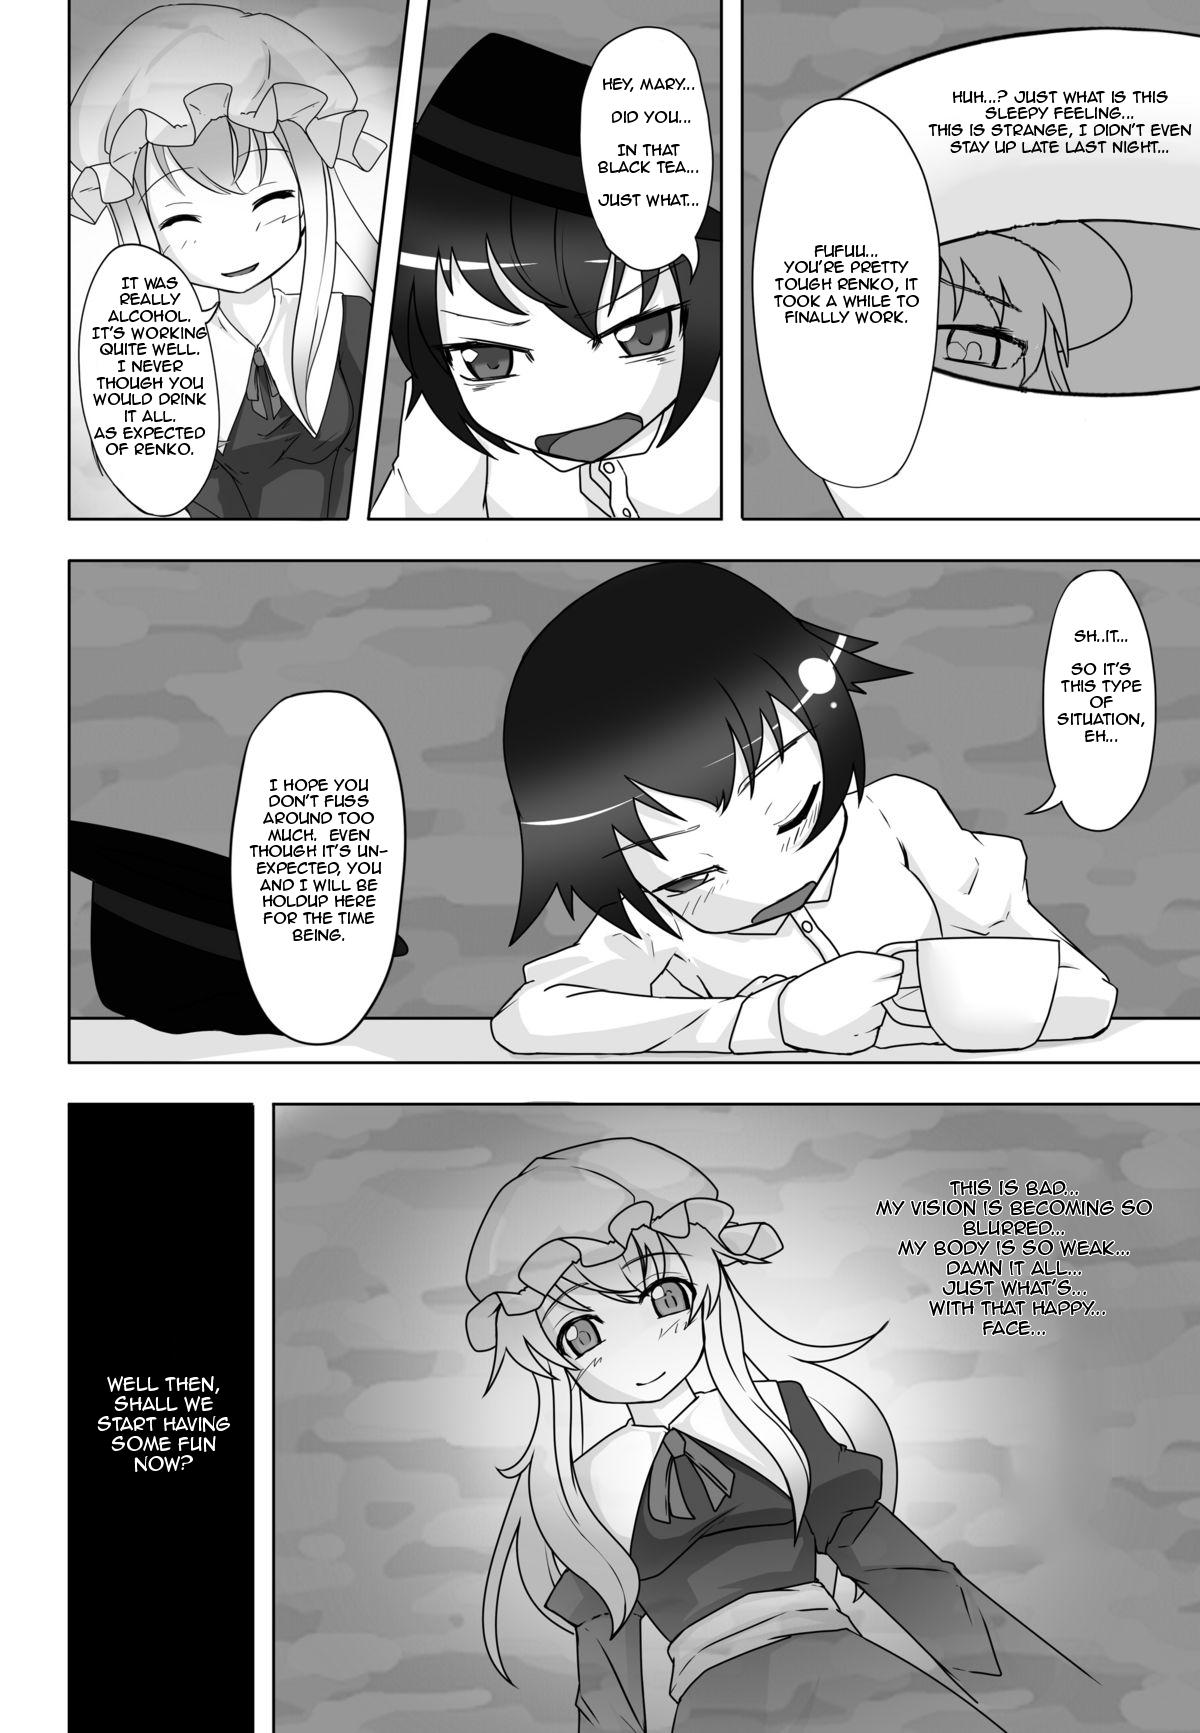 Lesbo 2nd Skin Vol. 1 - Touhou project Euro - Page 3